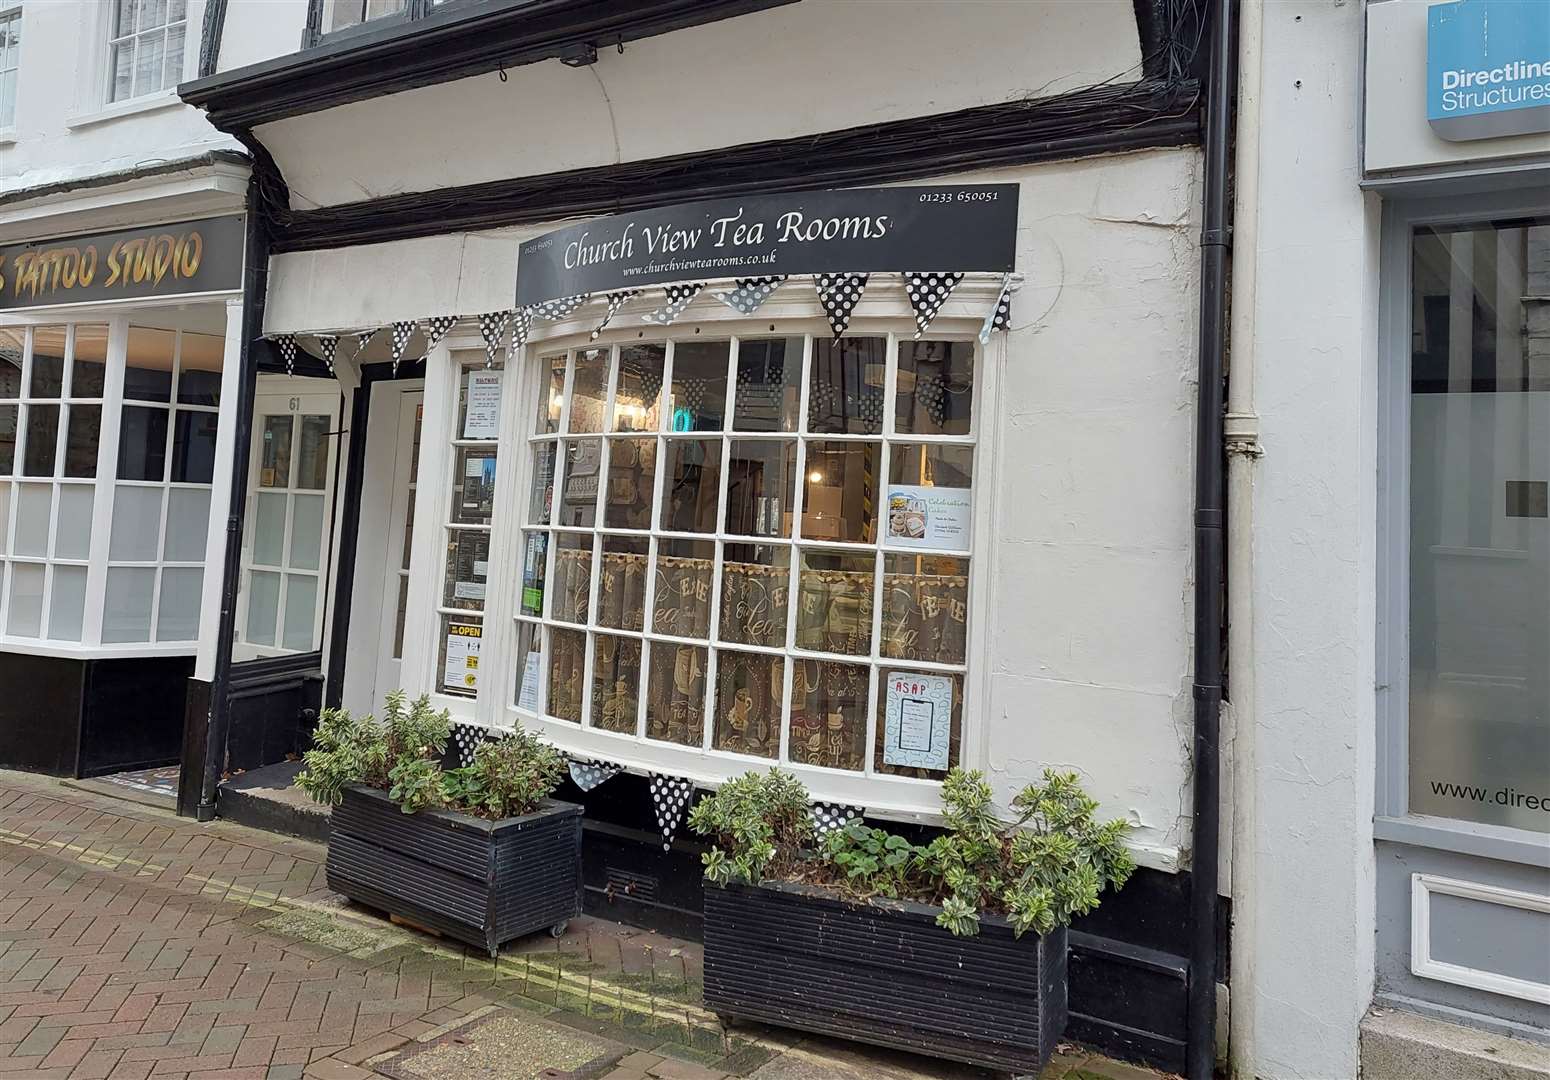 Plans to turn Church View Tea Rooms into a home and office space have been submitted to Ashford Borough Council